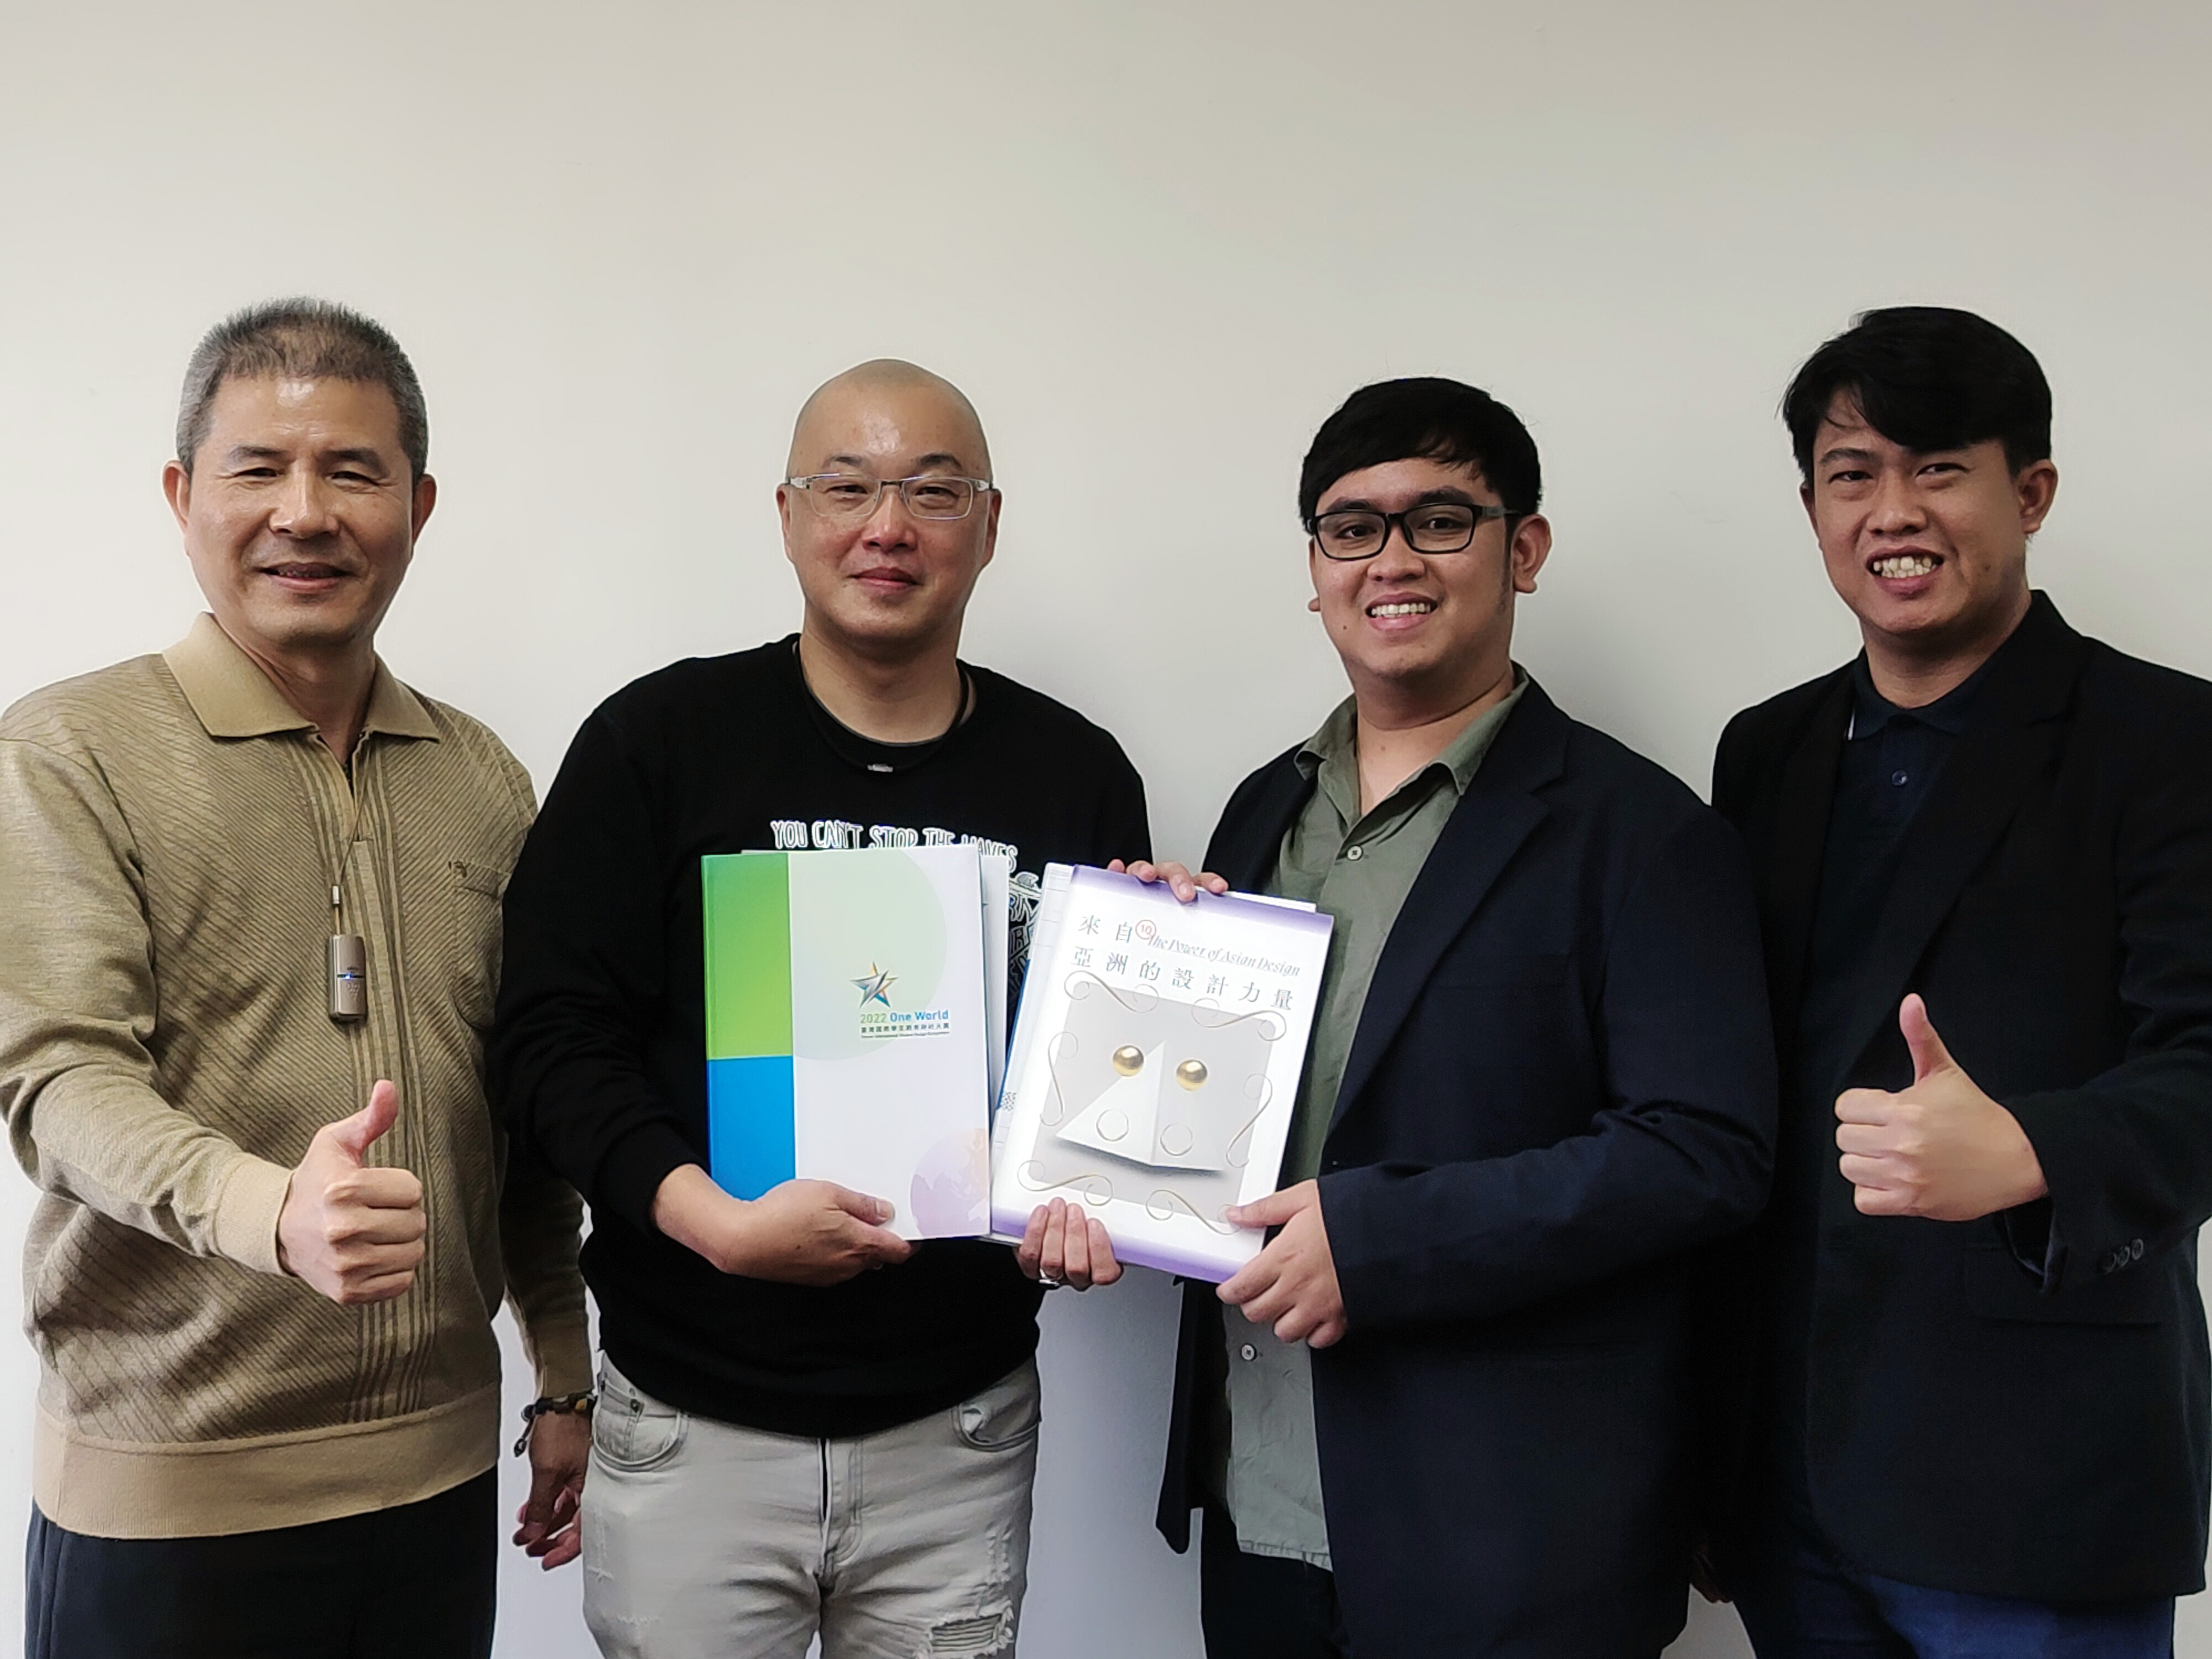 (from left to right) Asia University's Vice President Chi-Hsiung Chen, Department Chair Xiao-Wei Fang of Visual Communication Design, presenting materials on Asia University's design activities such as the "Taiwan International Student Design Competition" and "The Power of Asian Design 